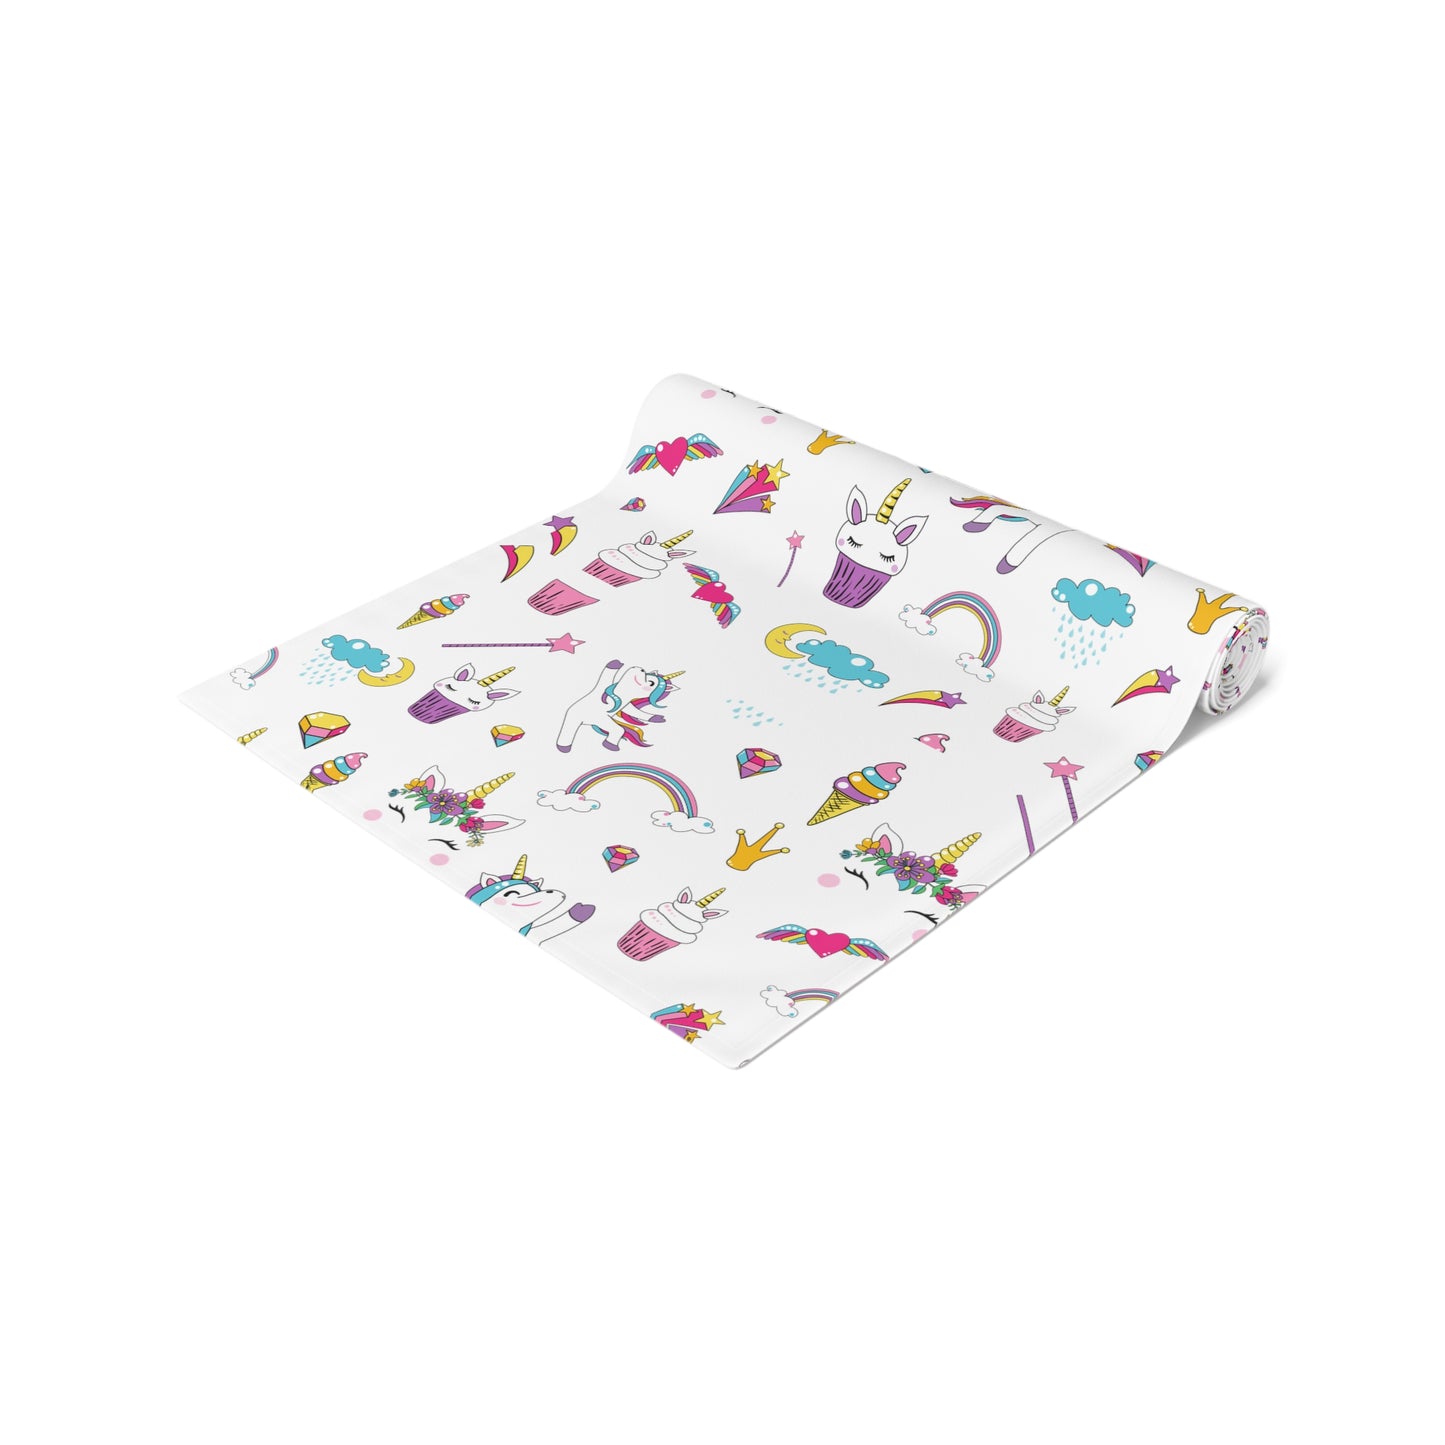 Birthday Unicorn Table Runner (Cotton, Poly), 2 Different Sizes